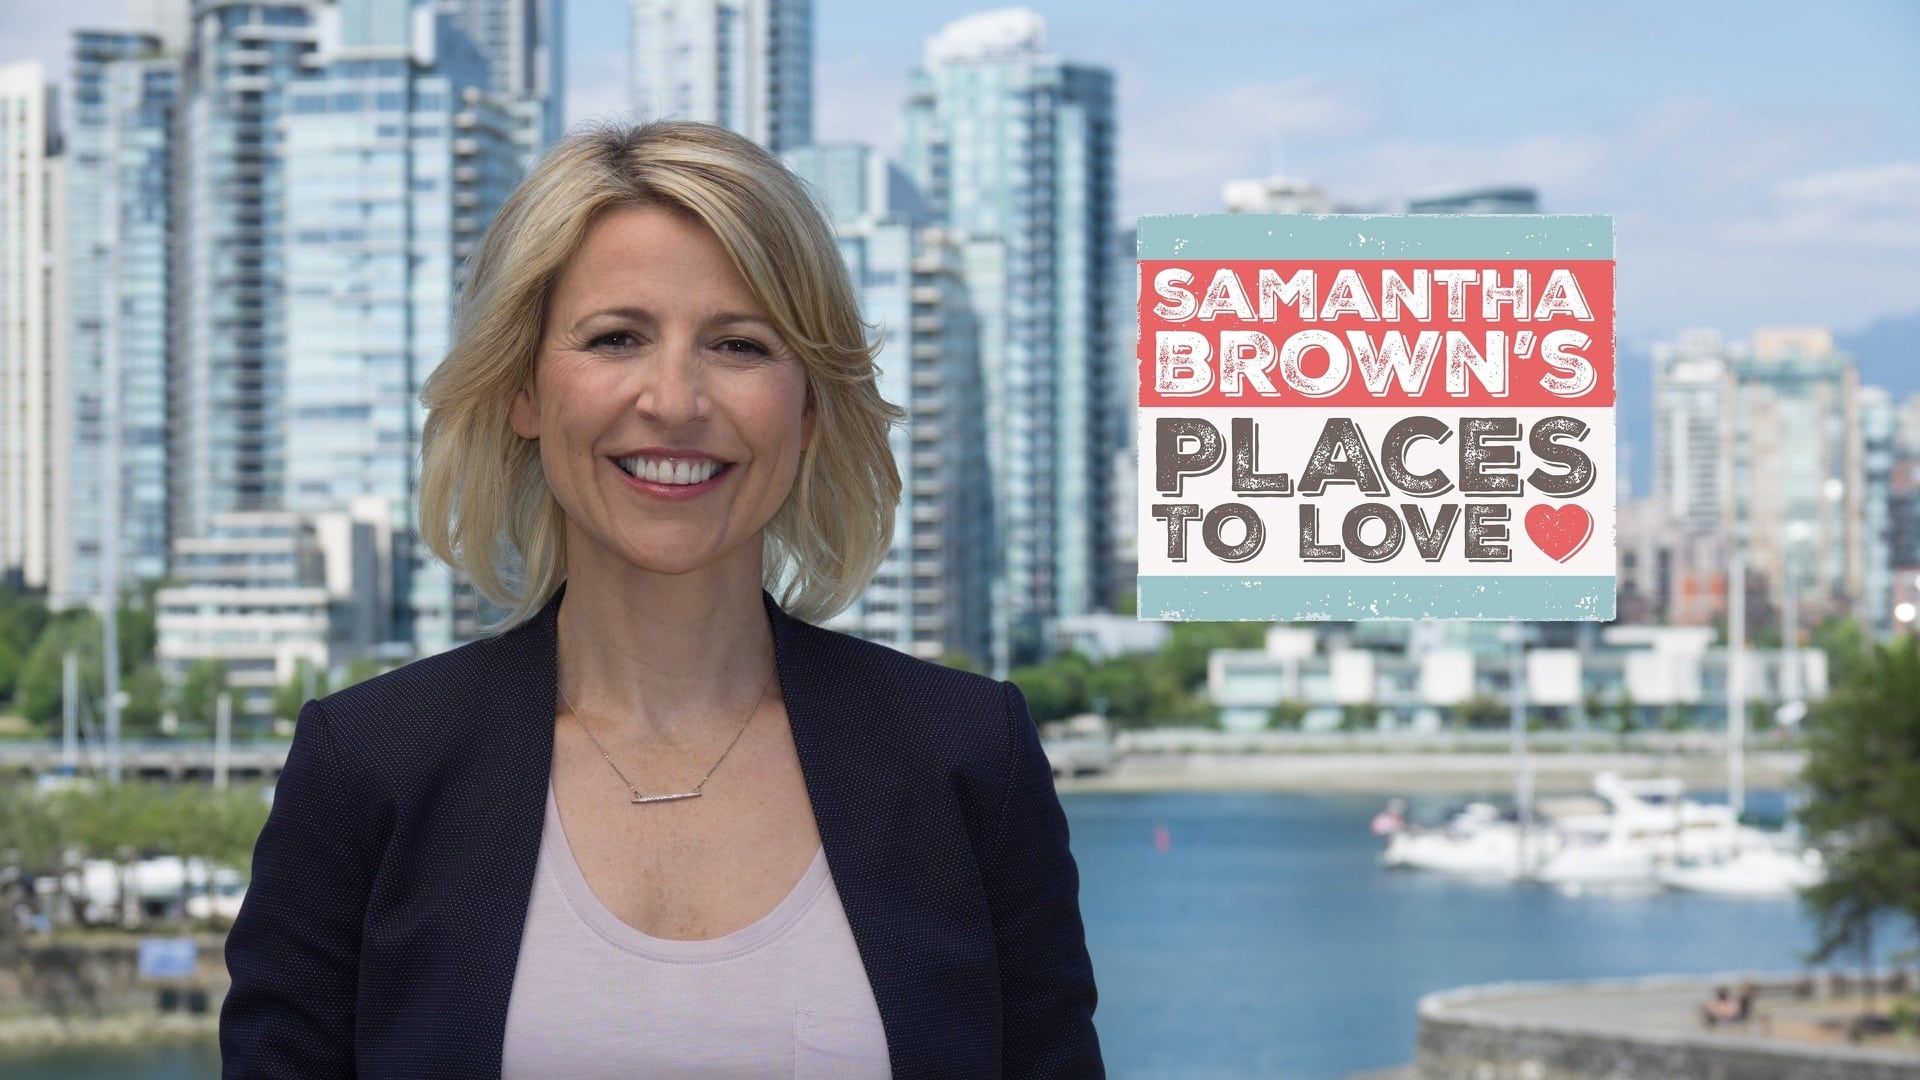 Samantha Brown's Places to Love background